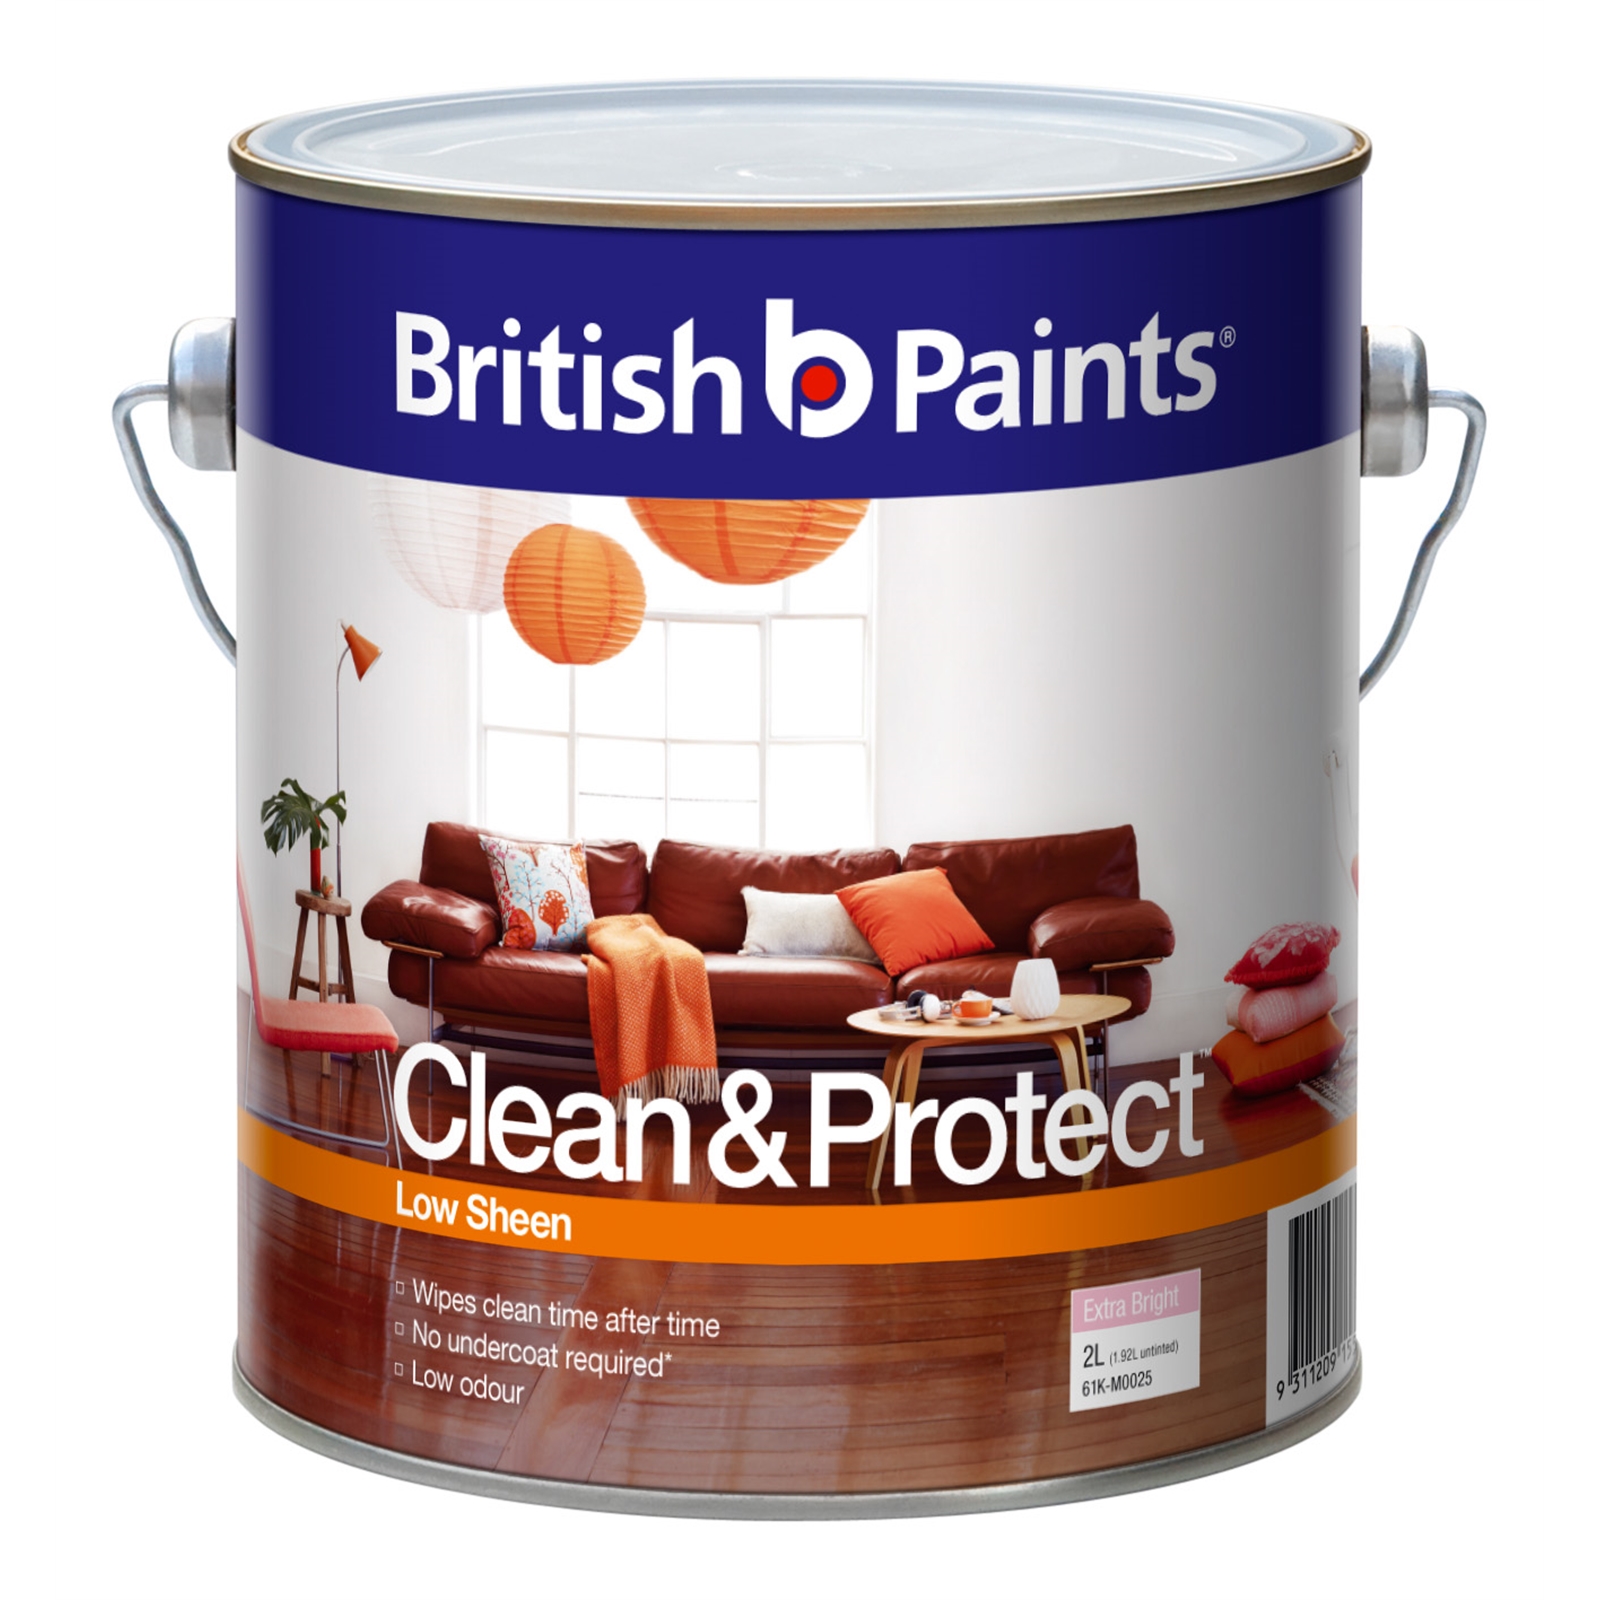 British Paints Clean & Protect 2L Low Sheen Extra Bright Interior Paint